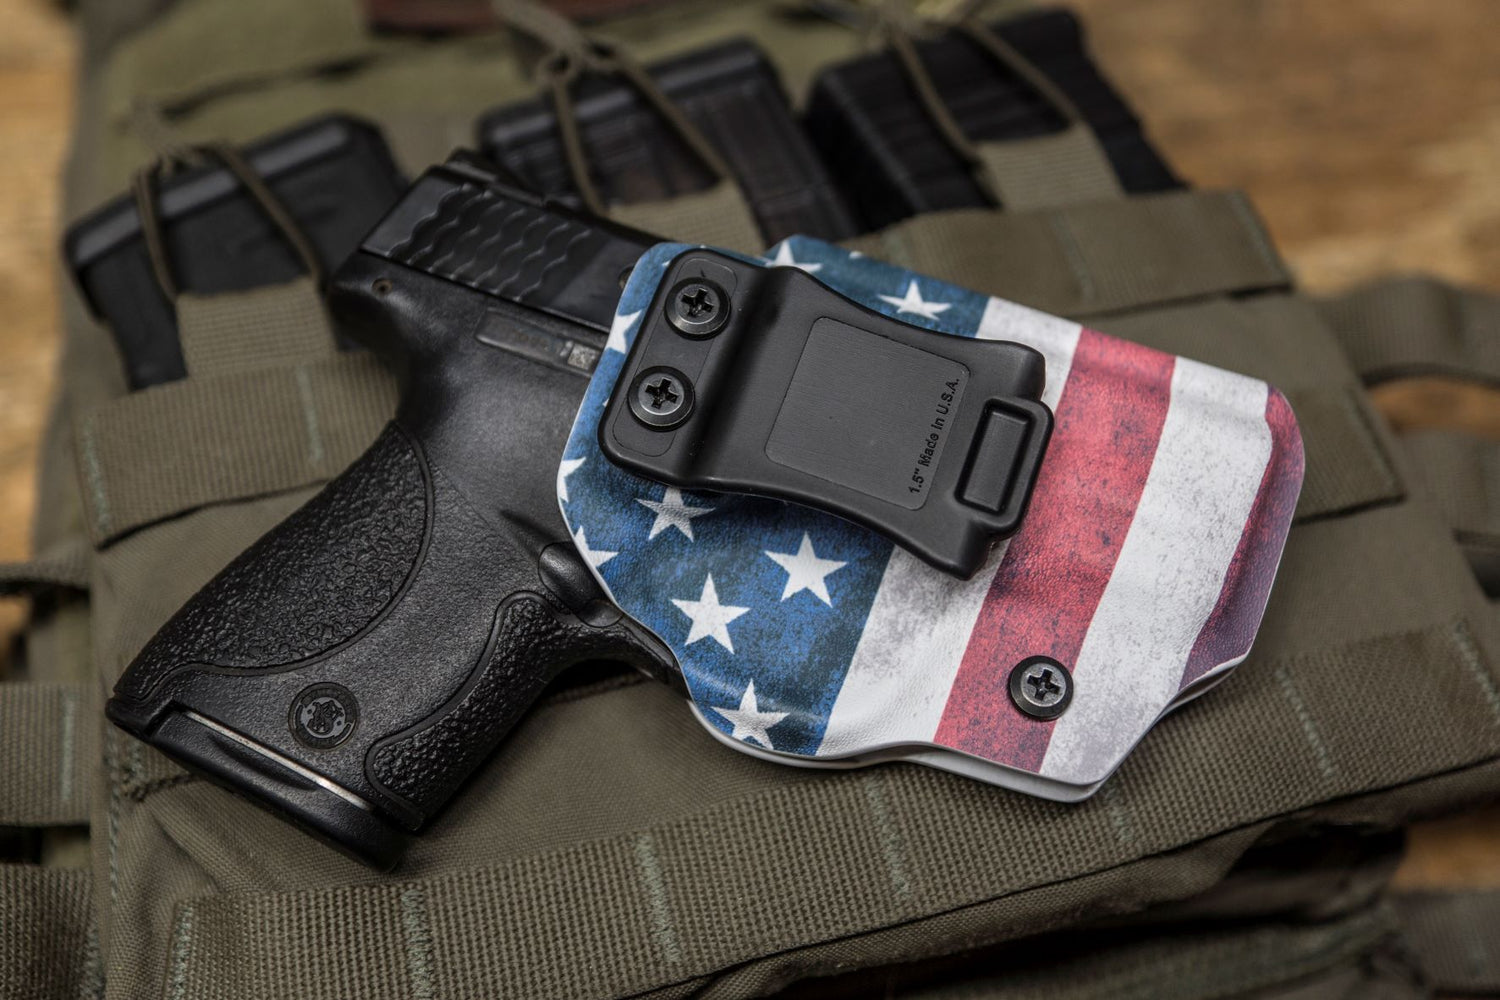 Inside the Waistband Kydex Holster for a Smith and Wesson M&P Shield.  Shown here in red white and blue American flag.